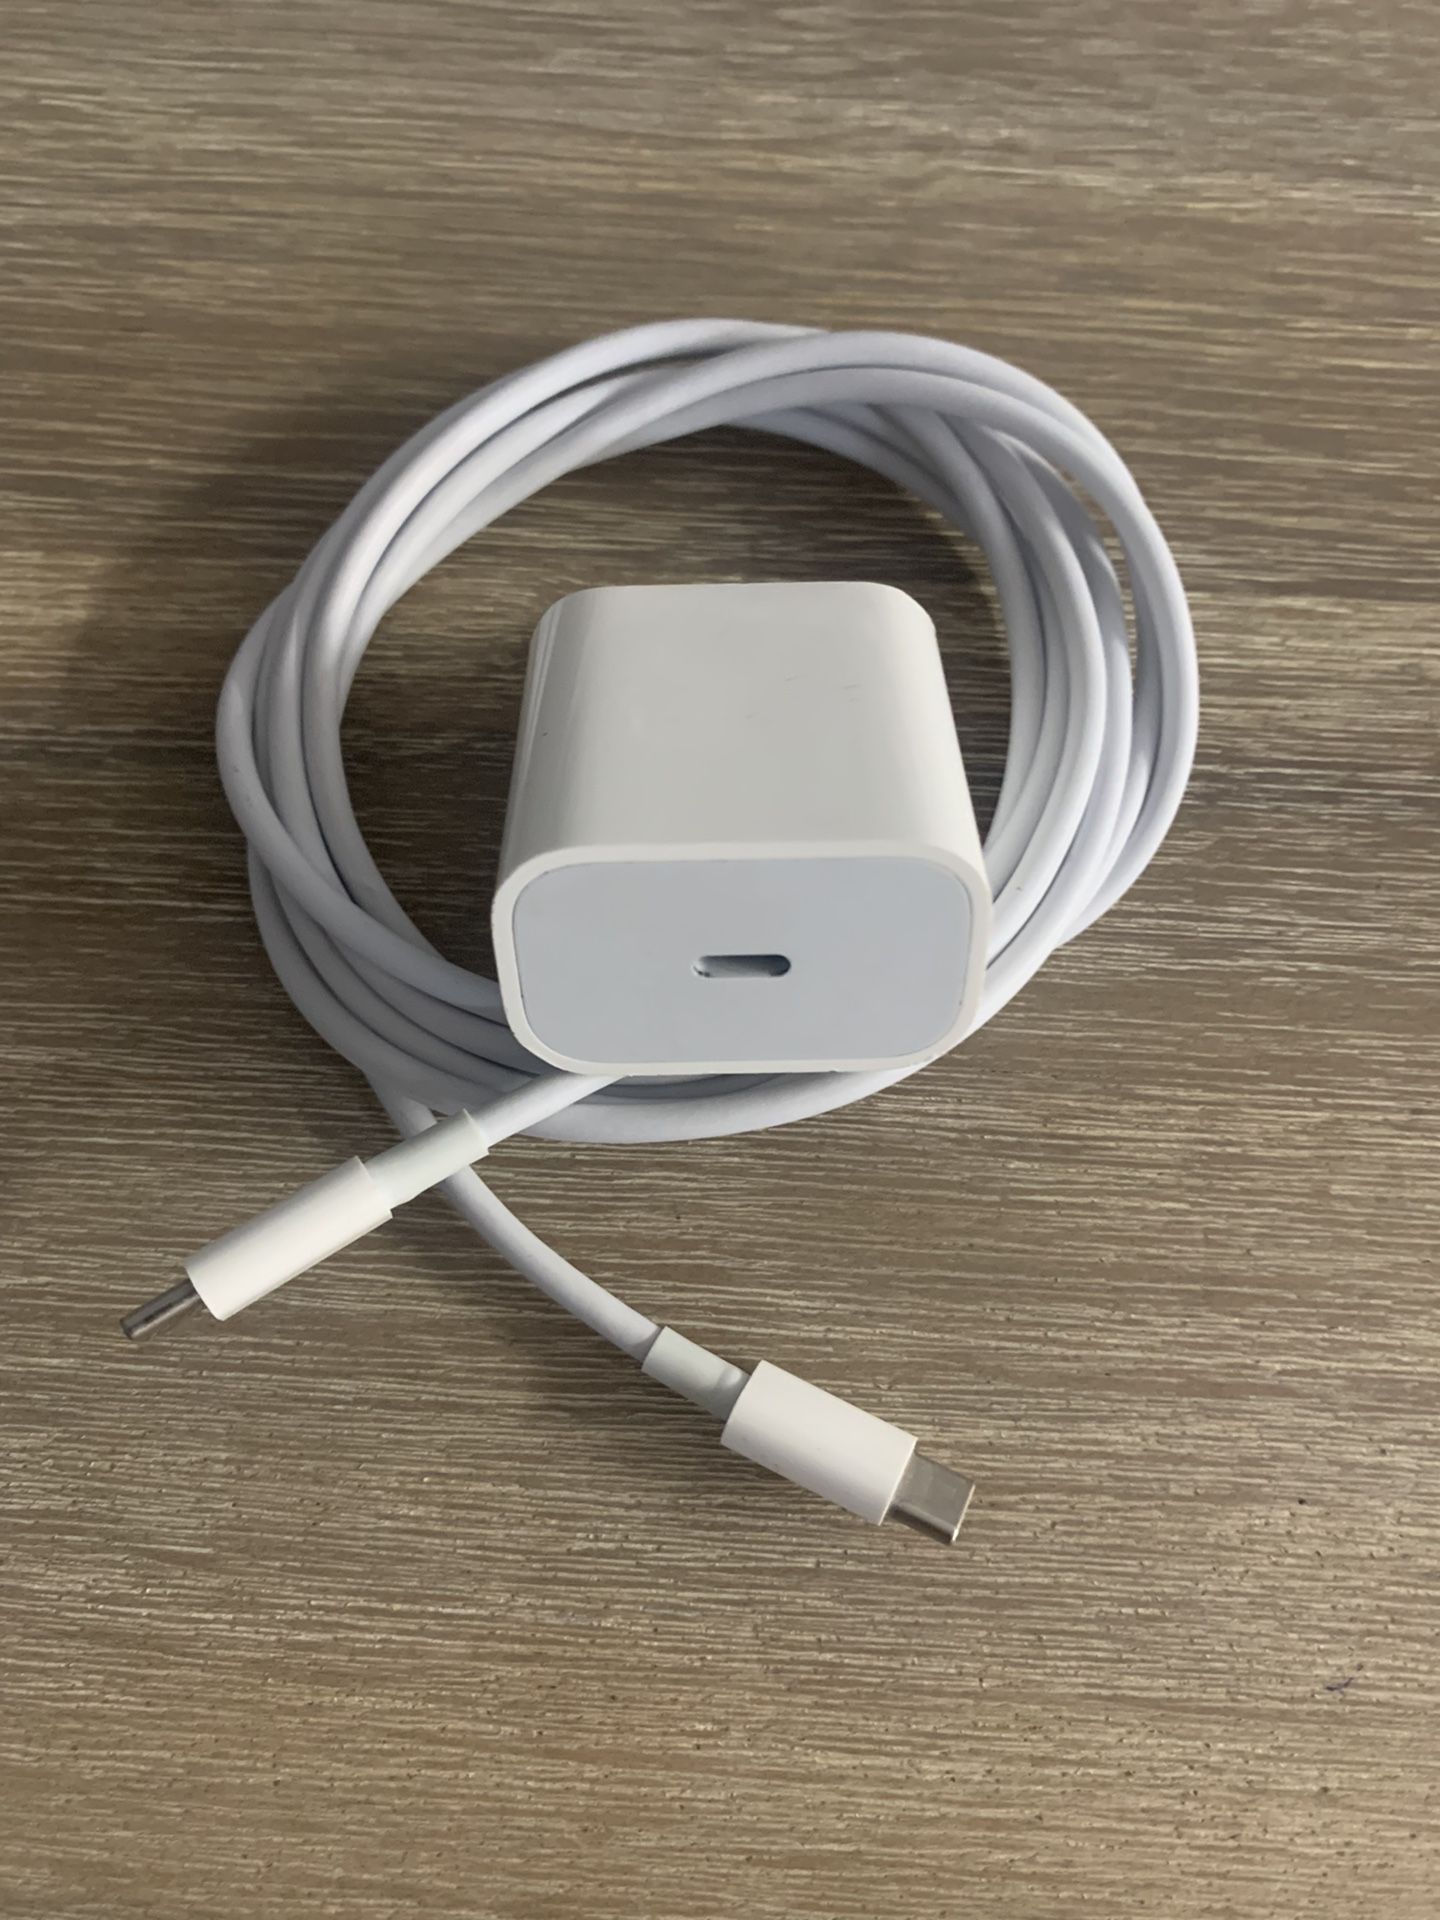 iPhone 15 Pro Max Type C Charger. Android 